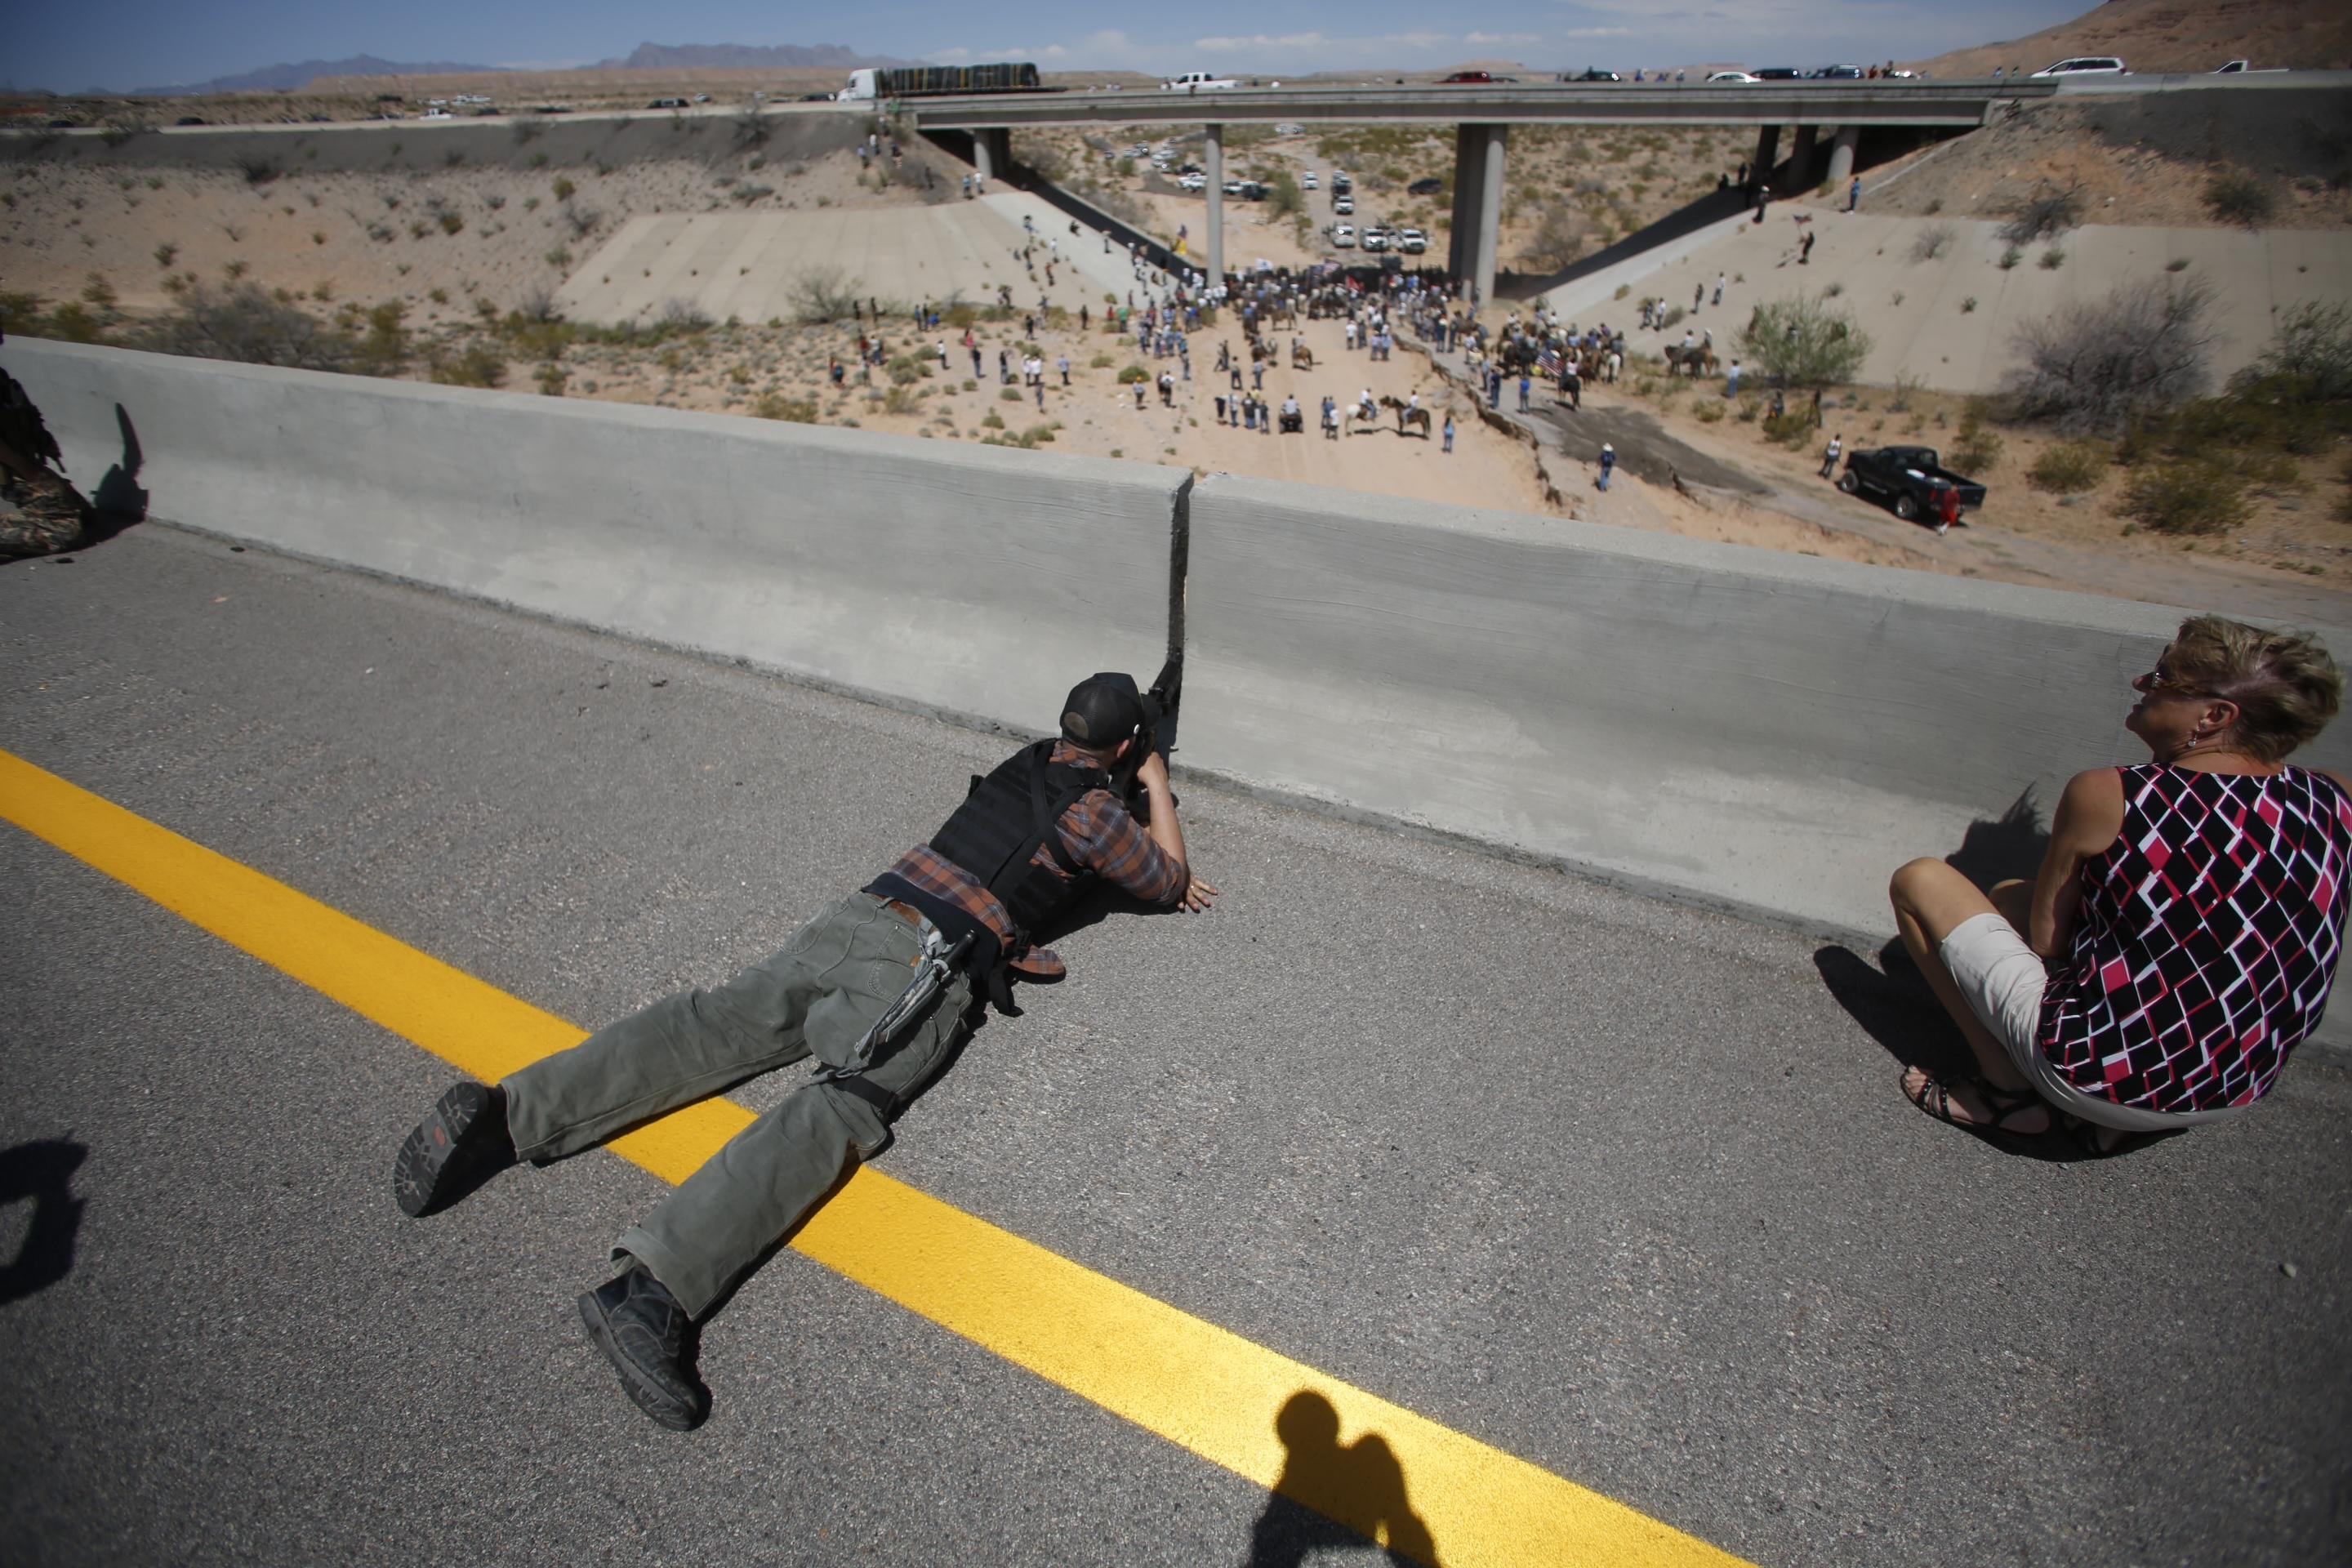 Episode 280: The Story of the Bundy Ranch Standoff